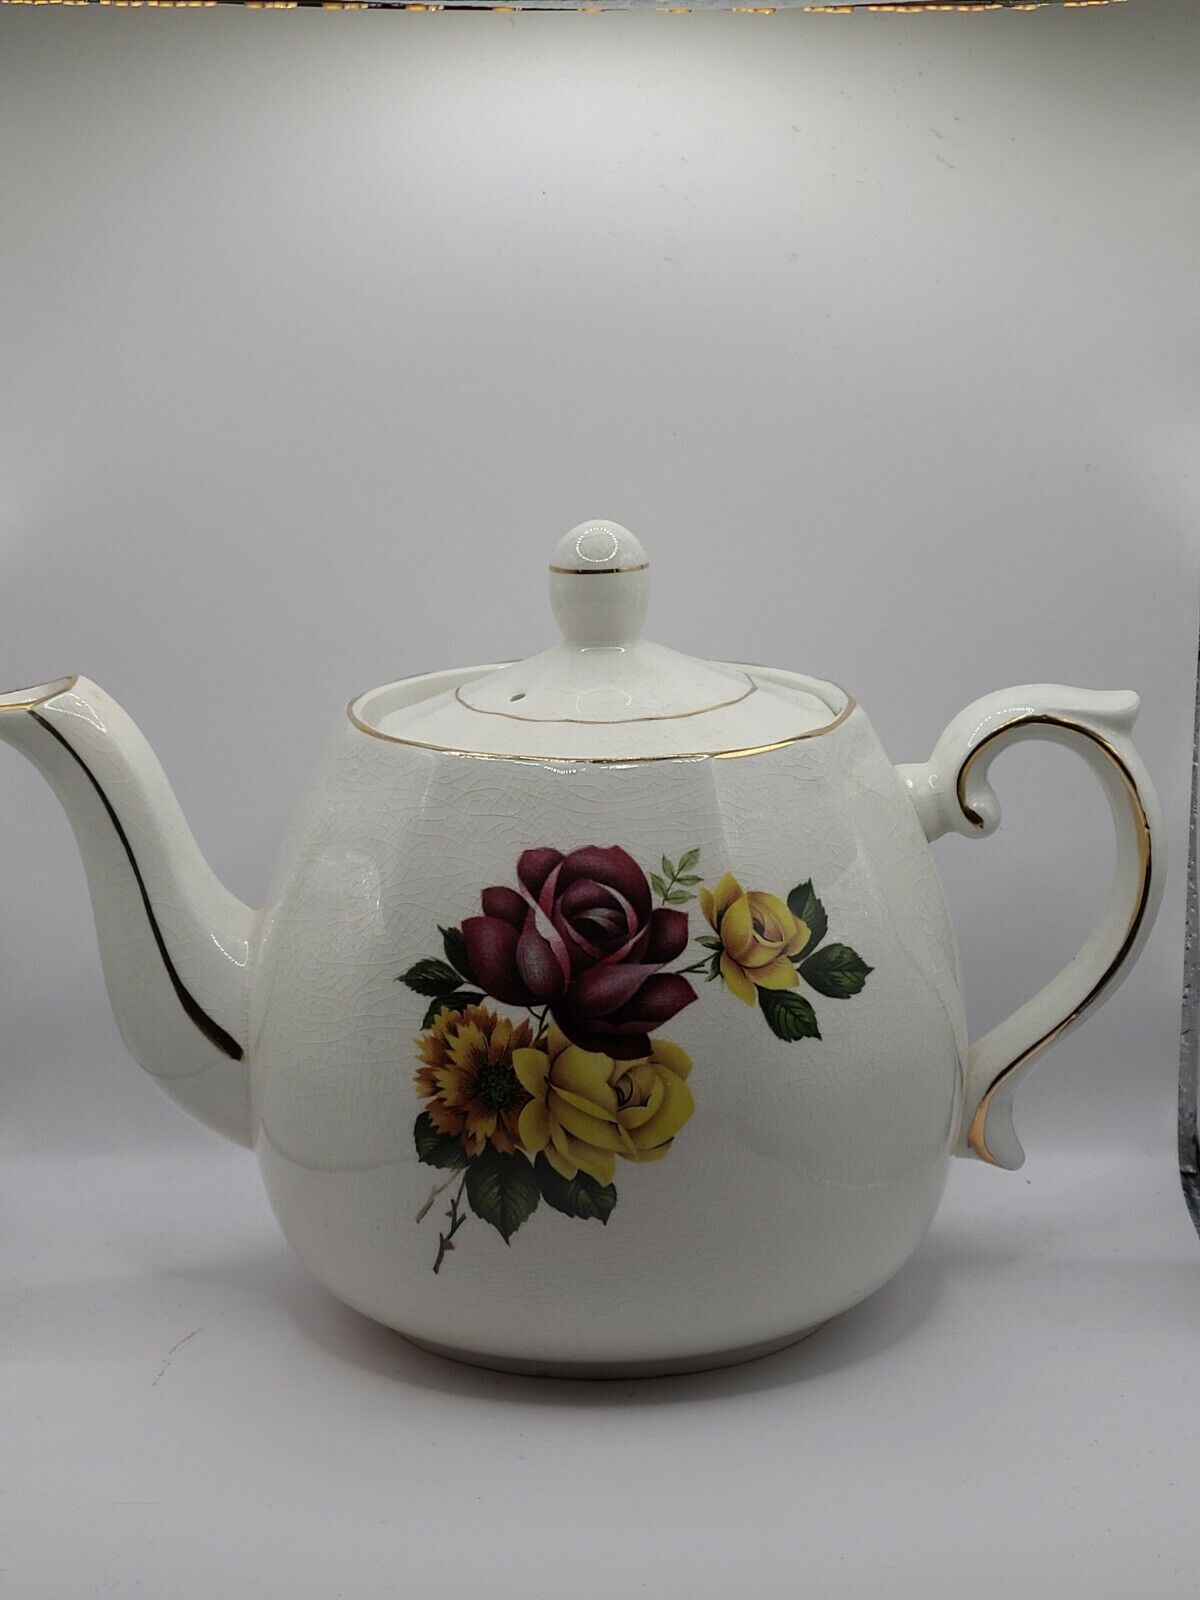 Vintage Ellgreave Wood & Sons Ironstone Teapot England White with white Roses